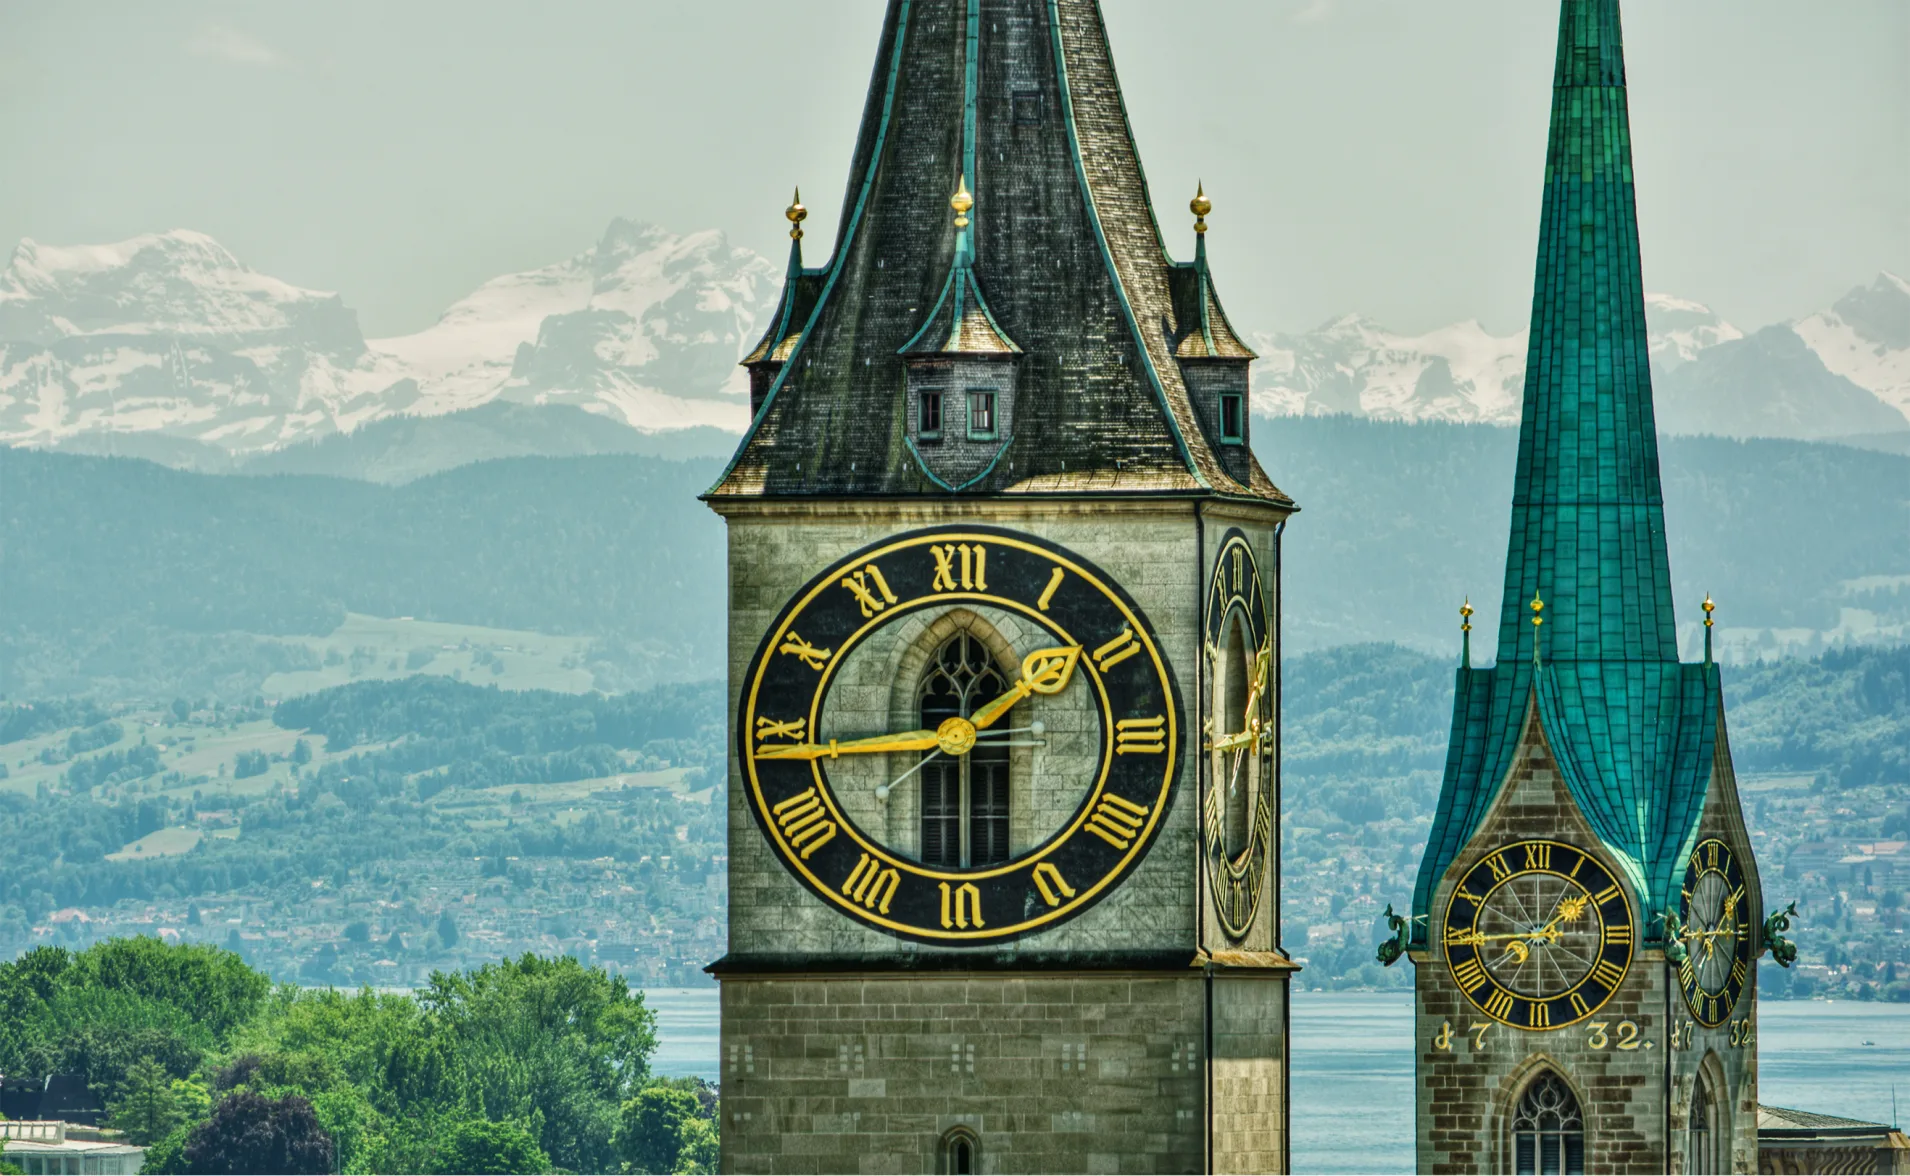 st peter clocktower in zurich with mountain backdrop